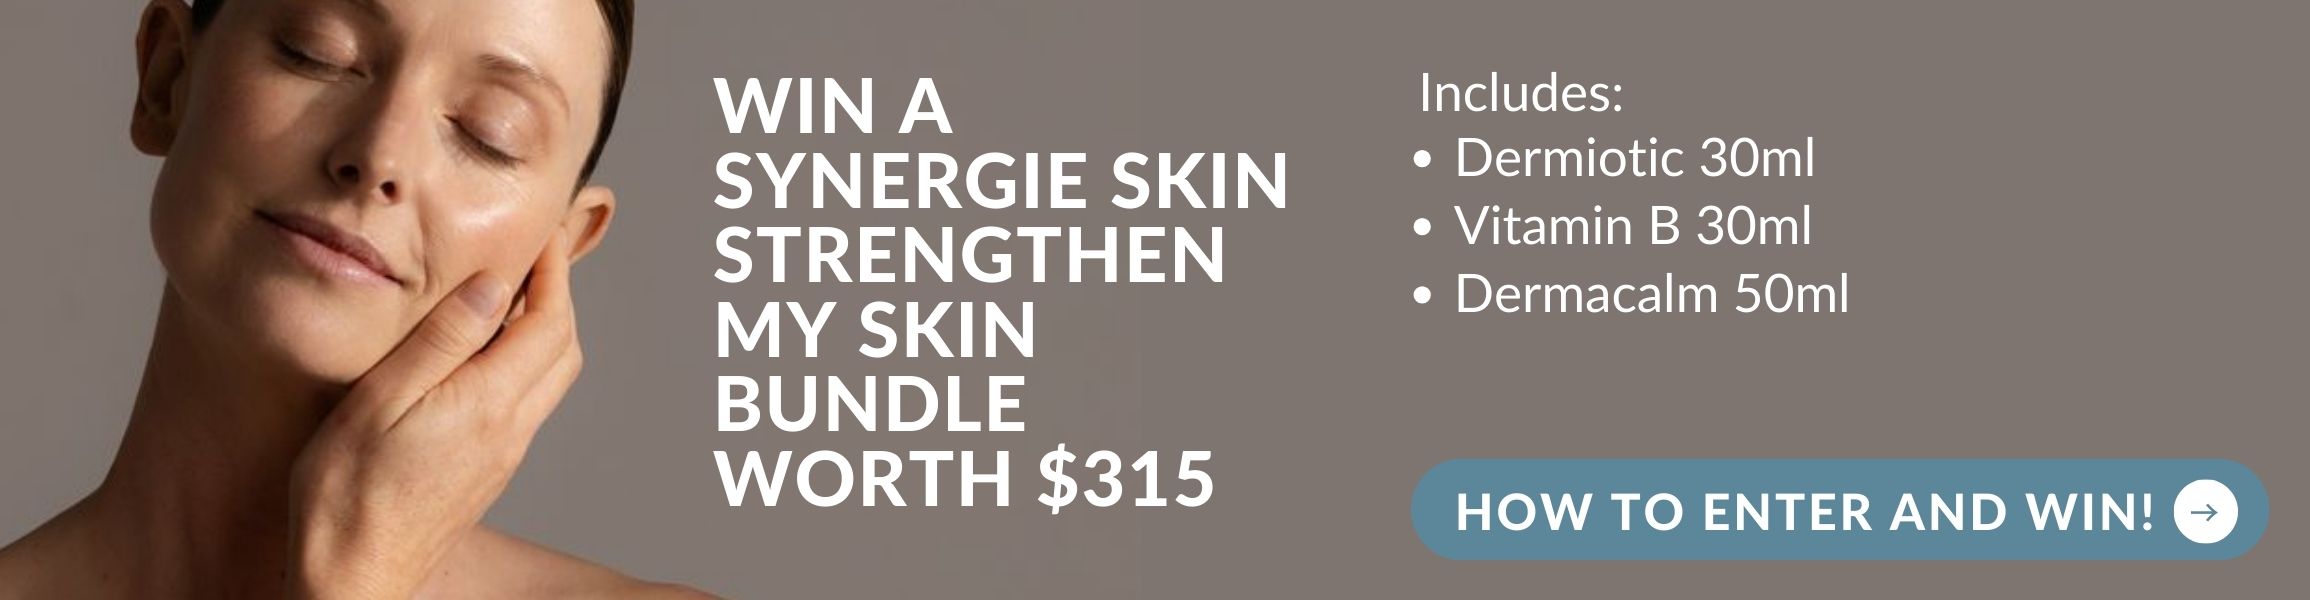 Win a Synergie Skin Strengthen Your Skin Bundle worth $315. Minimum spend $149 on Synergie. Click for more details.